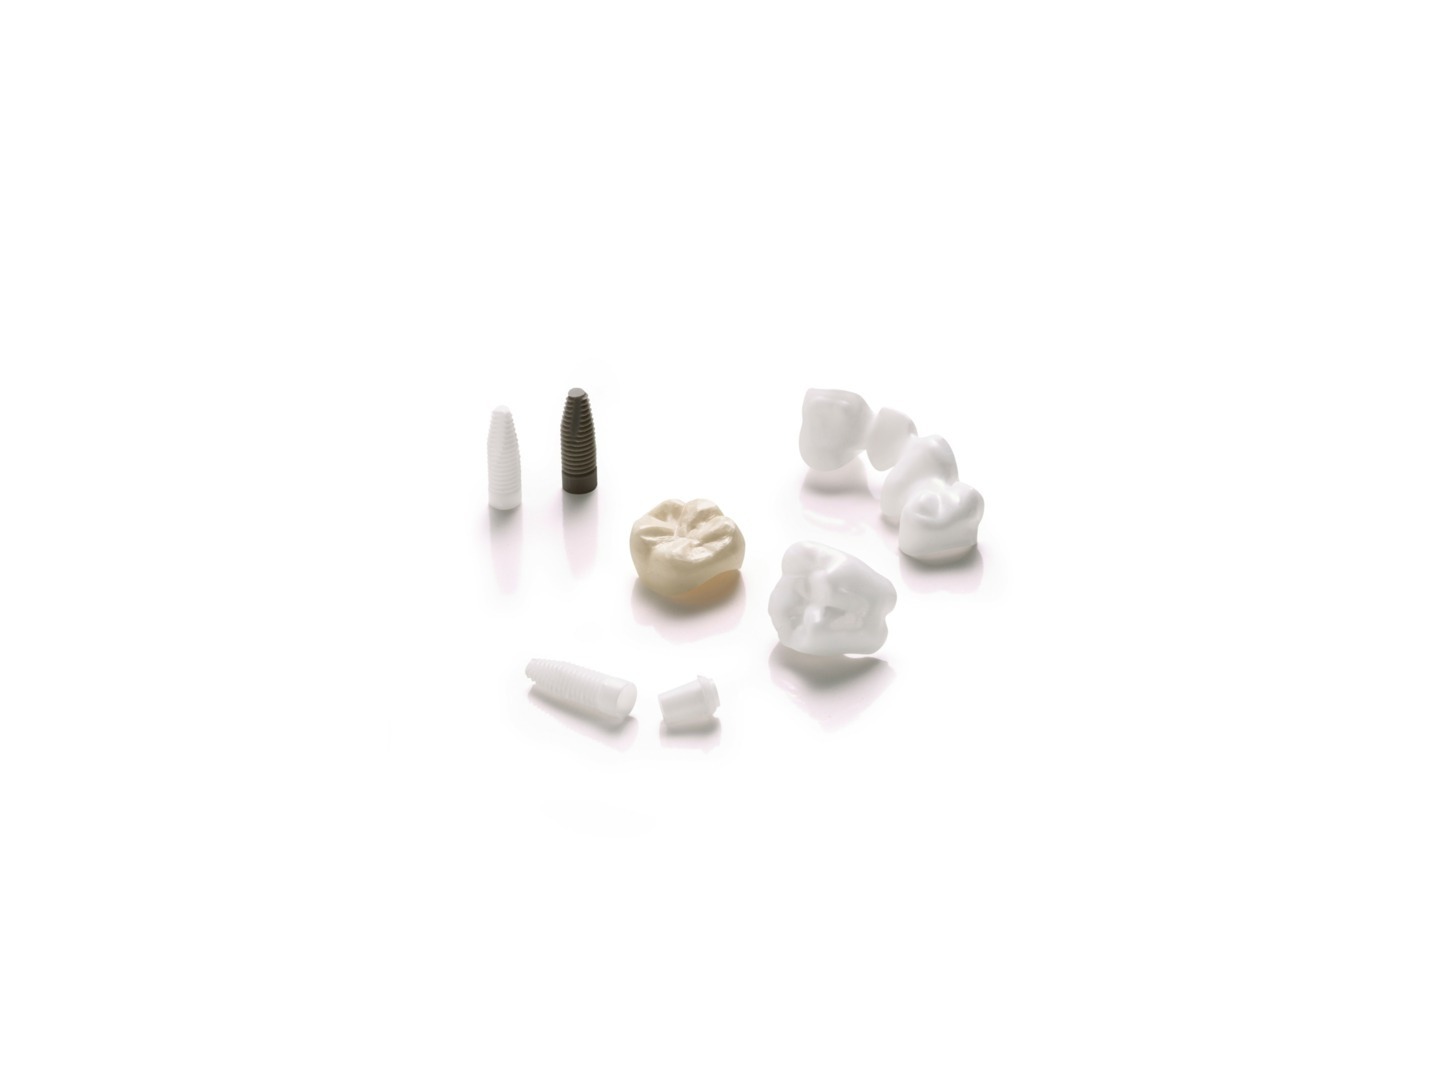 Did you know that ceramic 3D printing can manufacture complex dental implants?